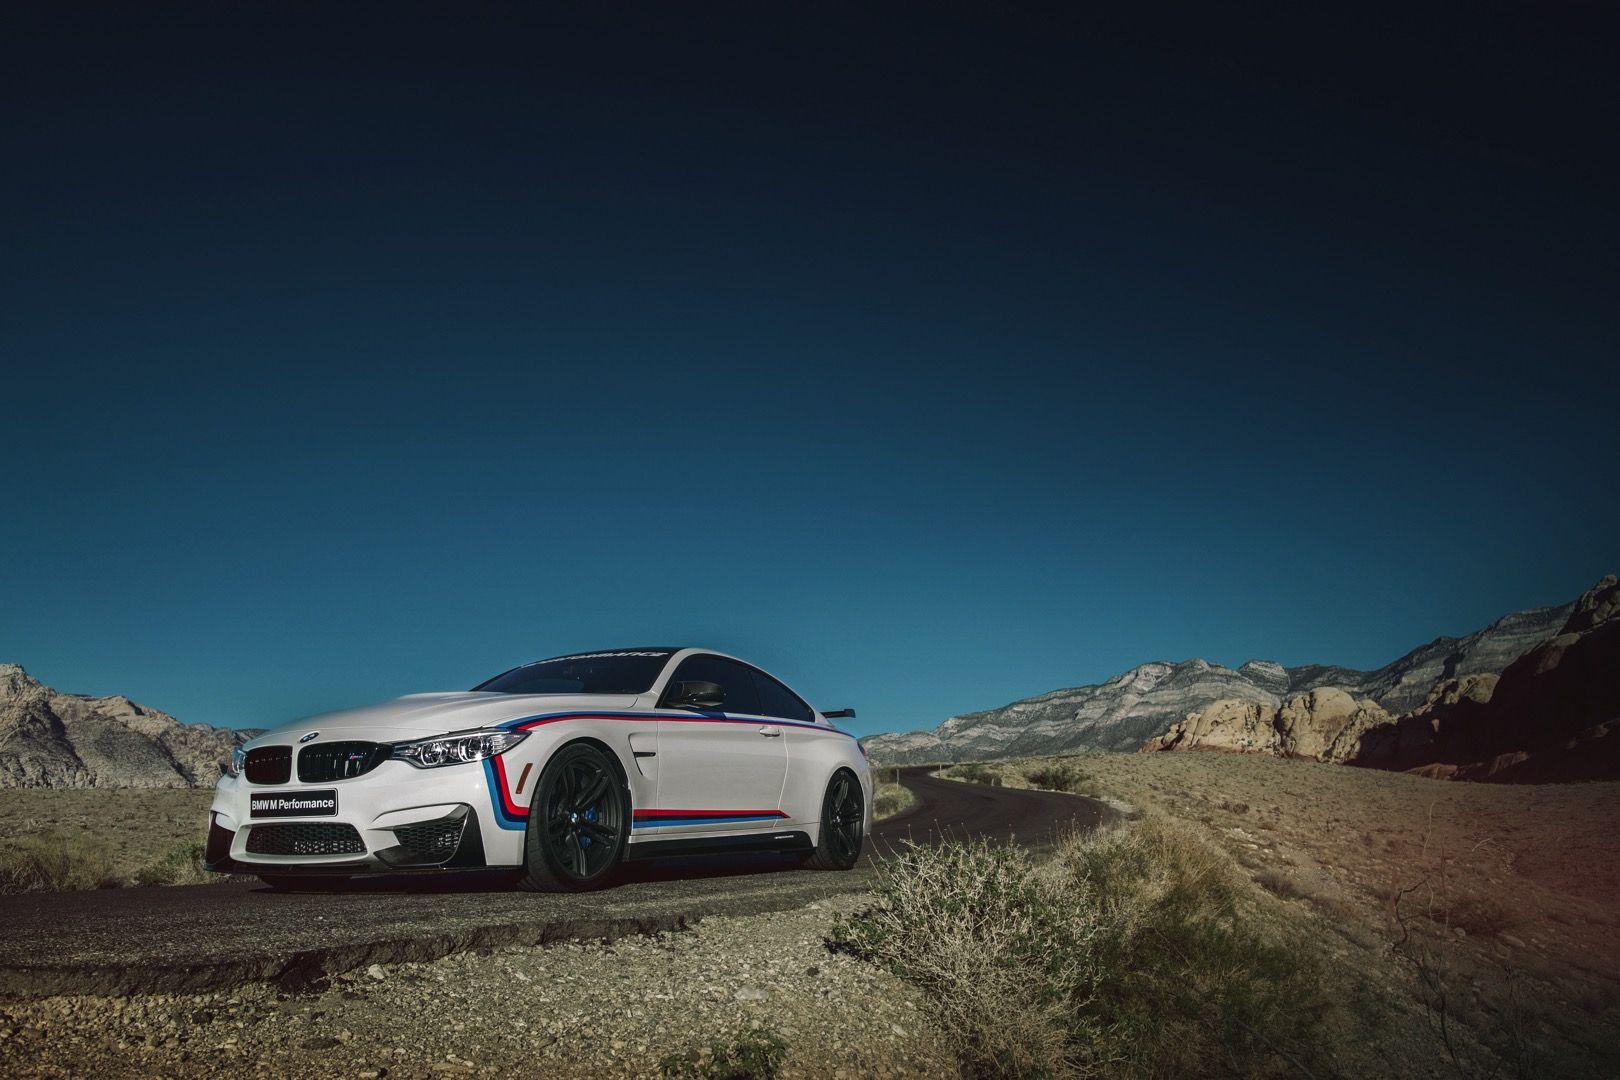 BMW M4 with M Performance Parts Wallpaper: The Thirst